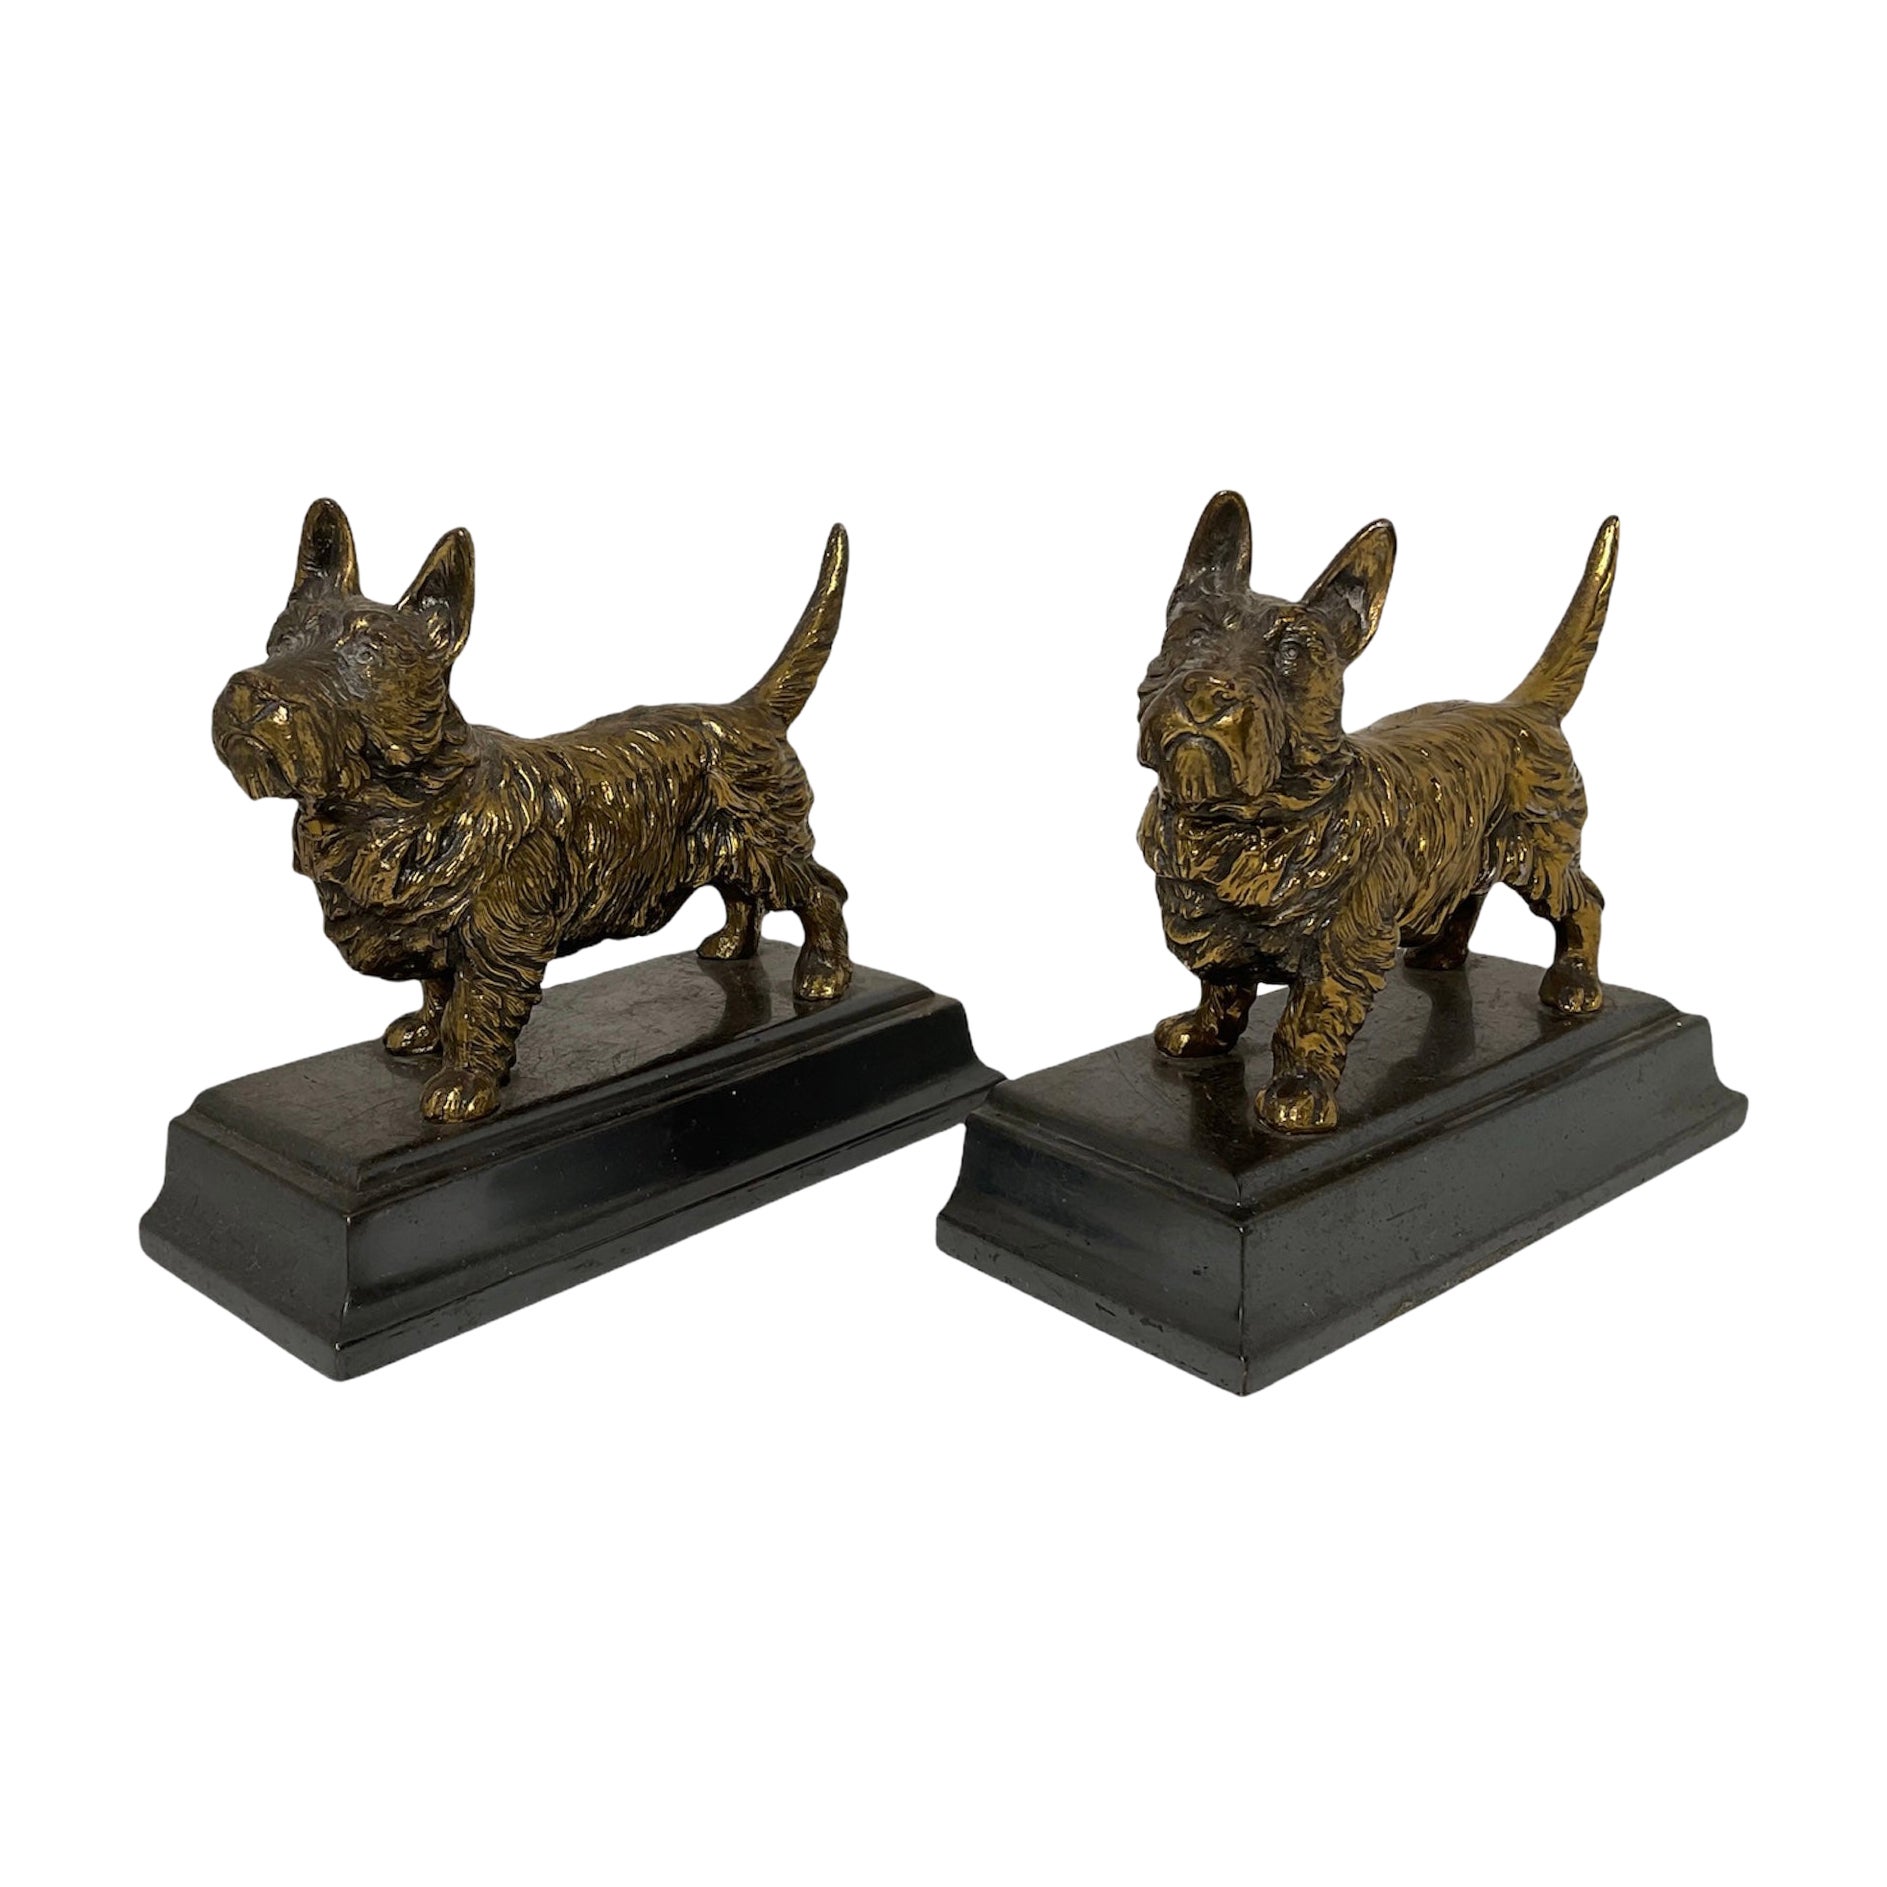 Jennings Brothers Cast Metal Scottish Terrier Dogs Bookends